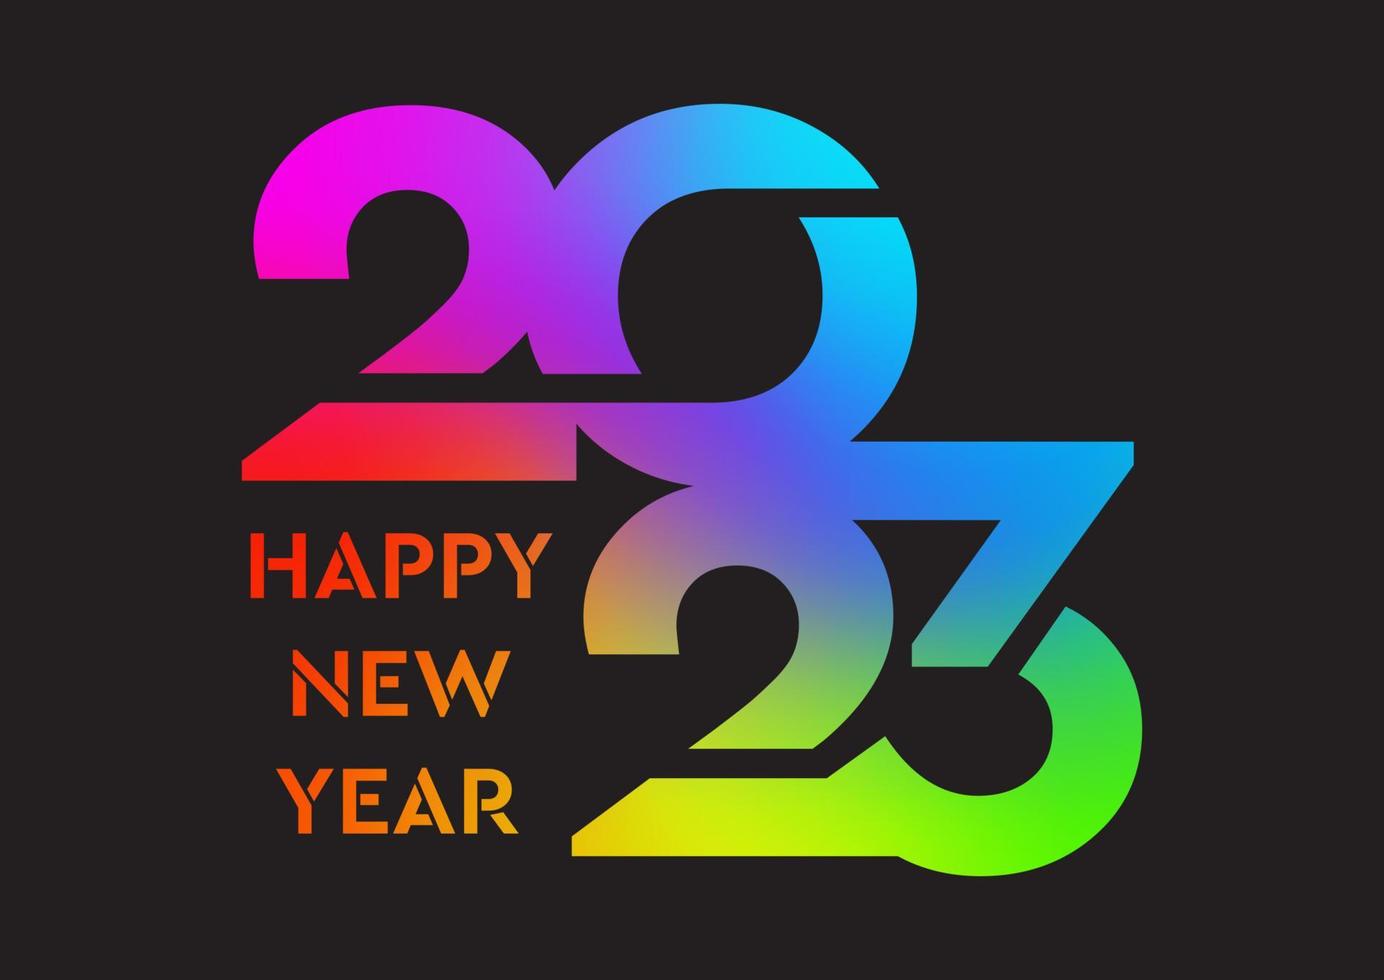 Happy New Year background with gradient text design vector